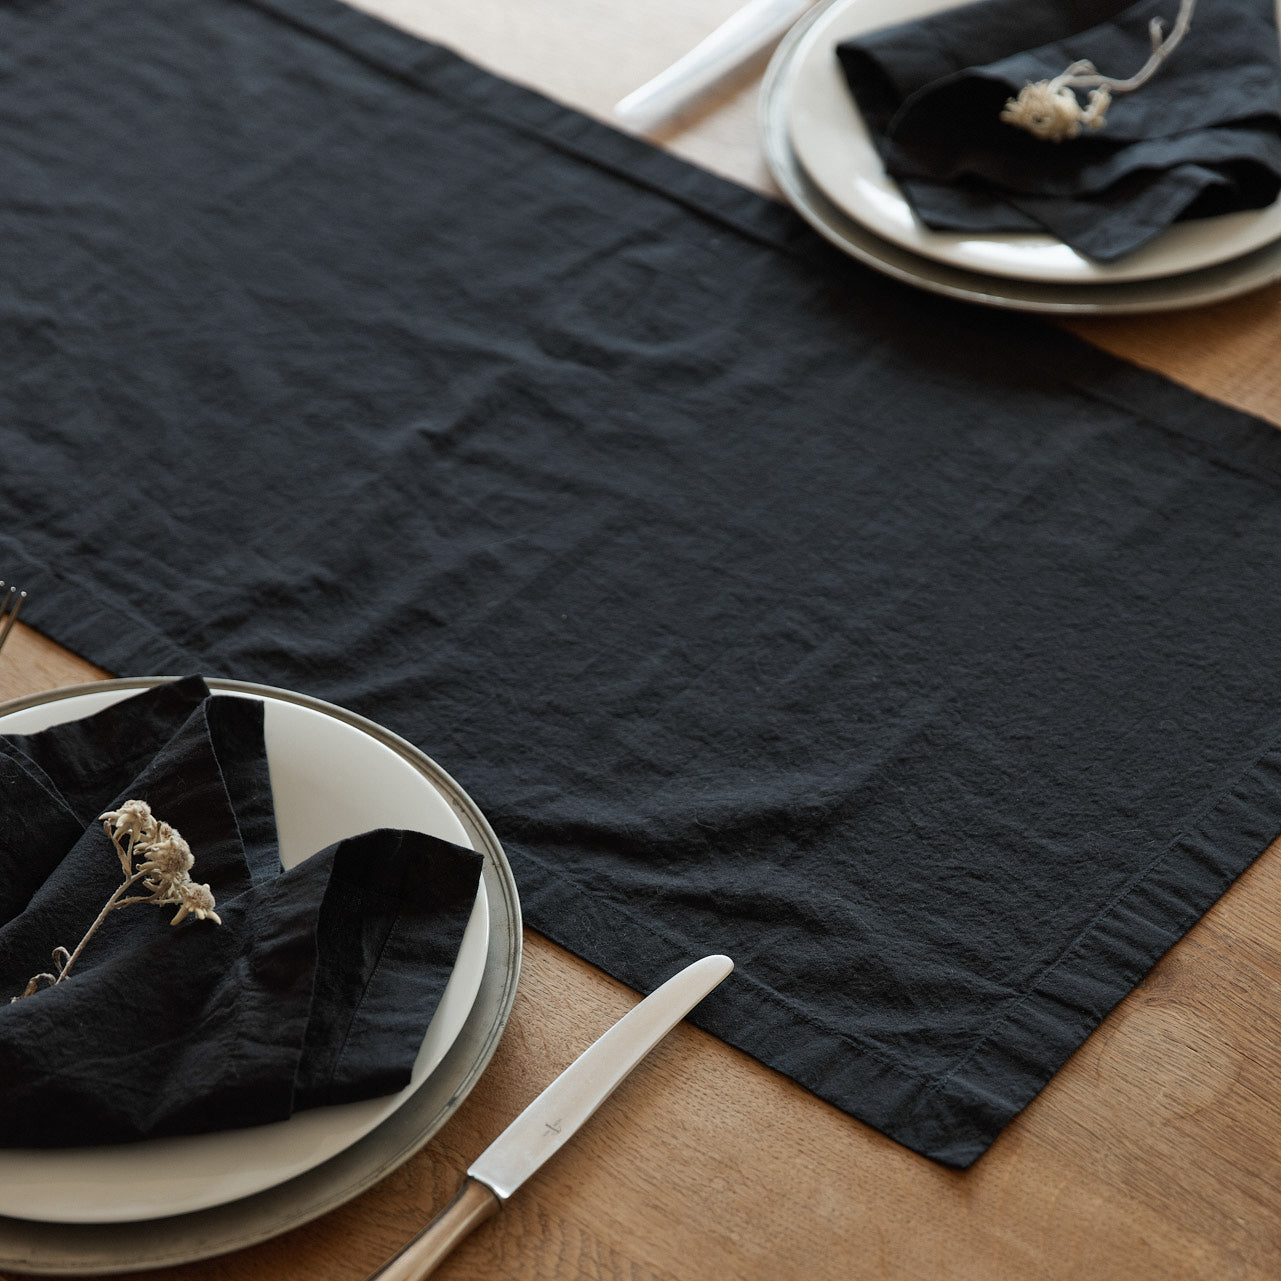 Table Runner Washed Cotton